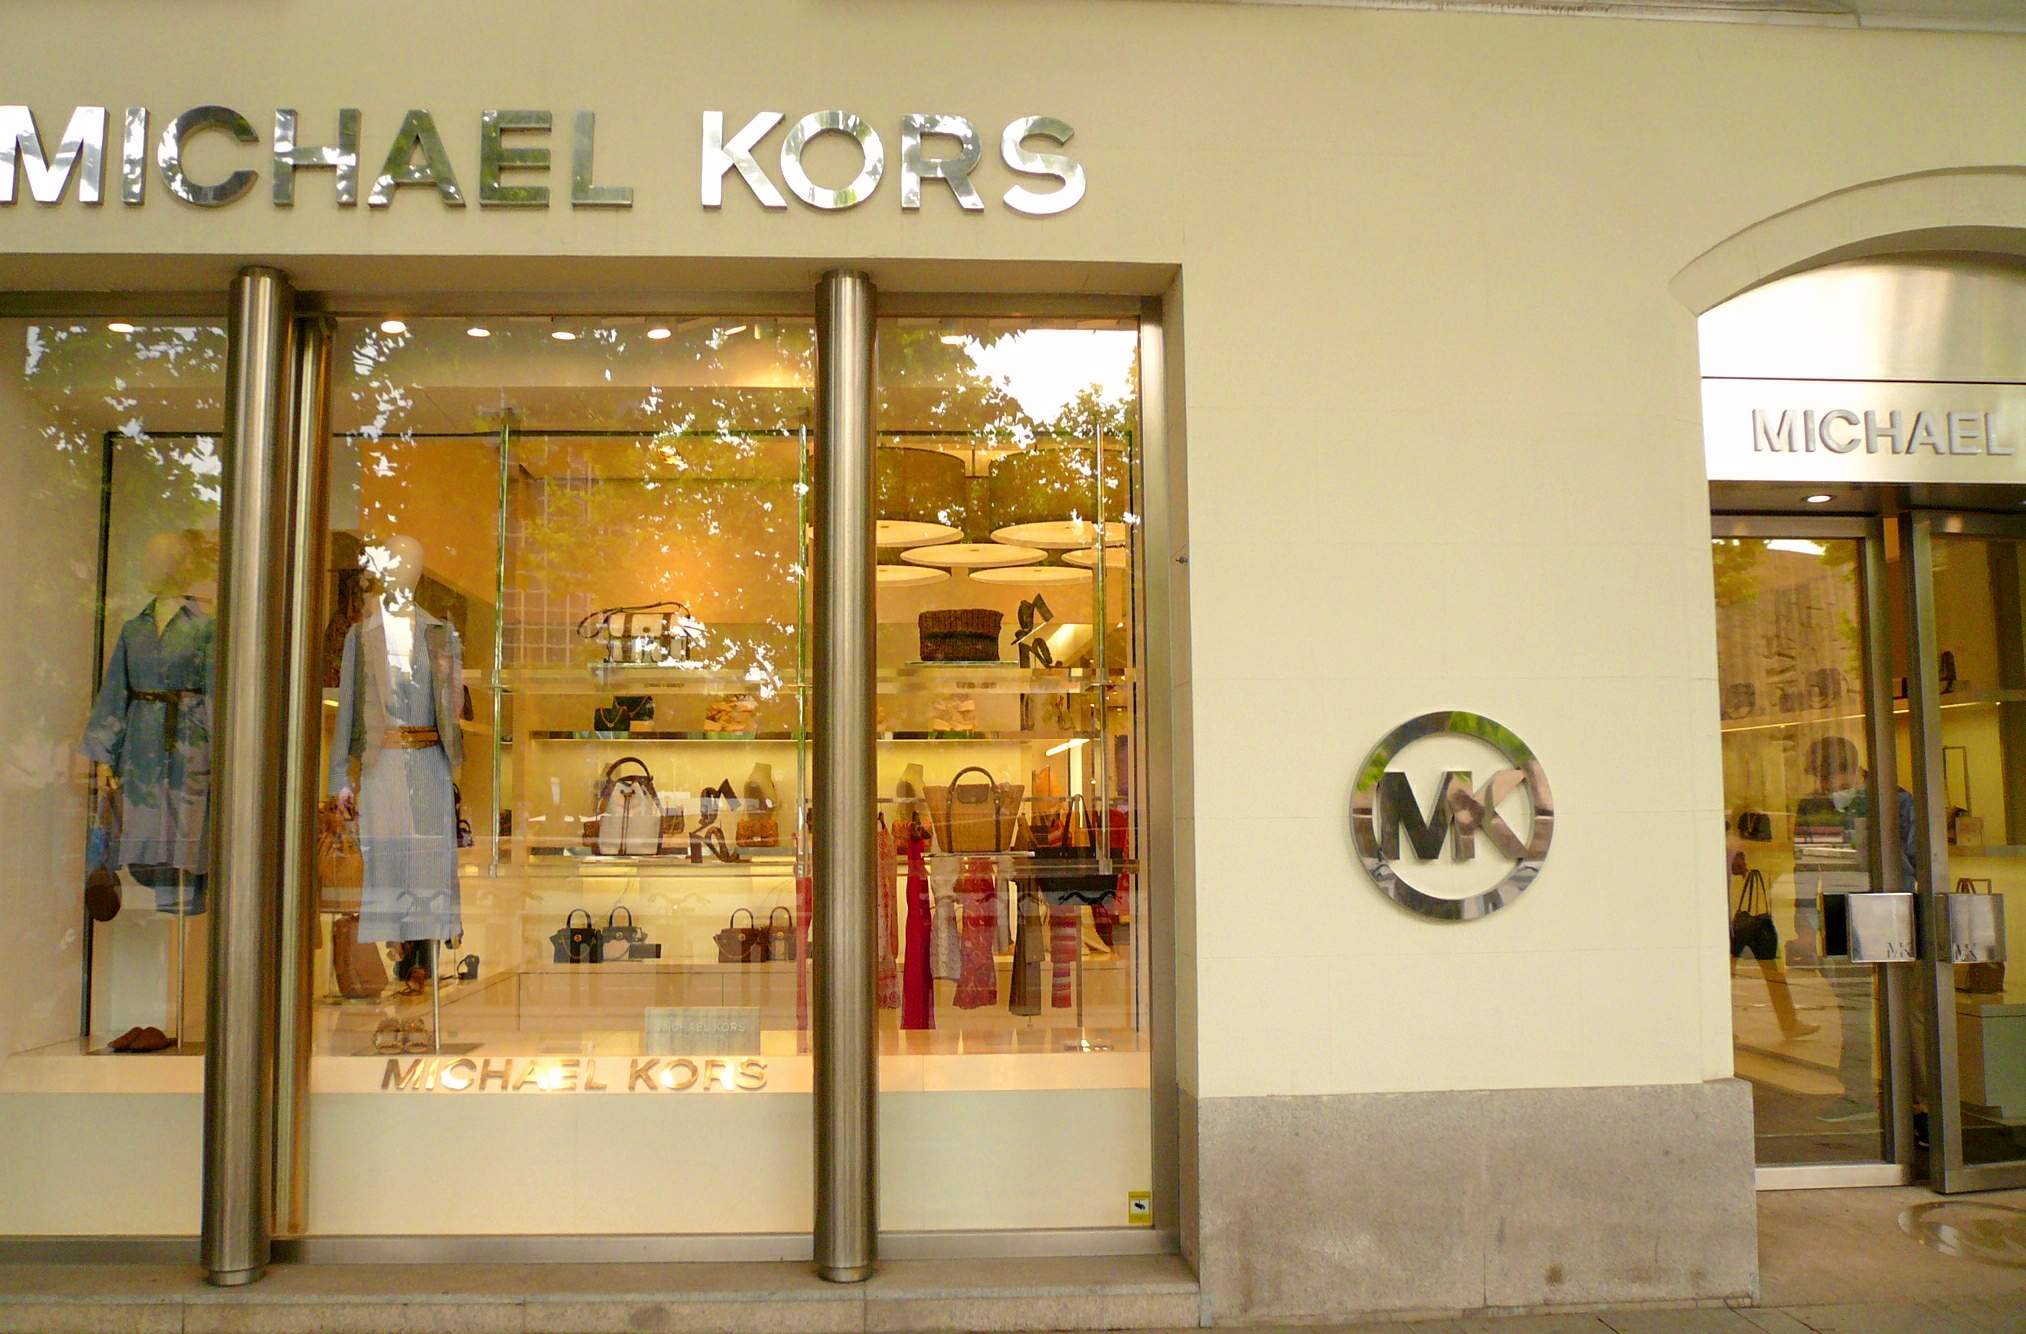 Michael Kors shop with MK logo on the wall